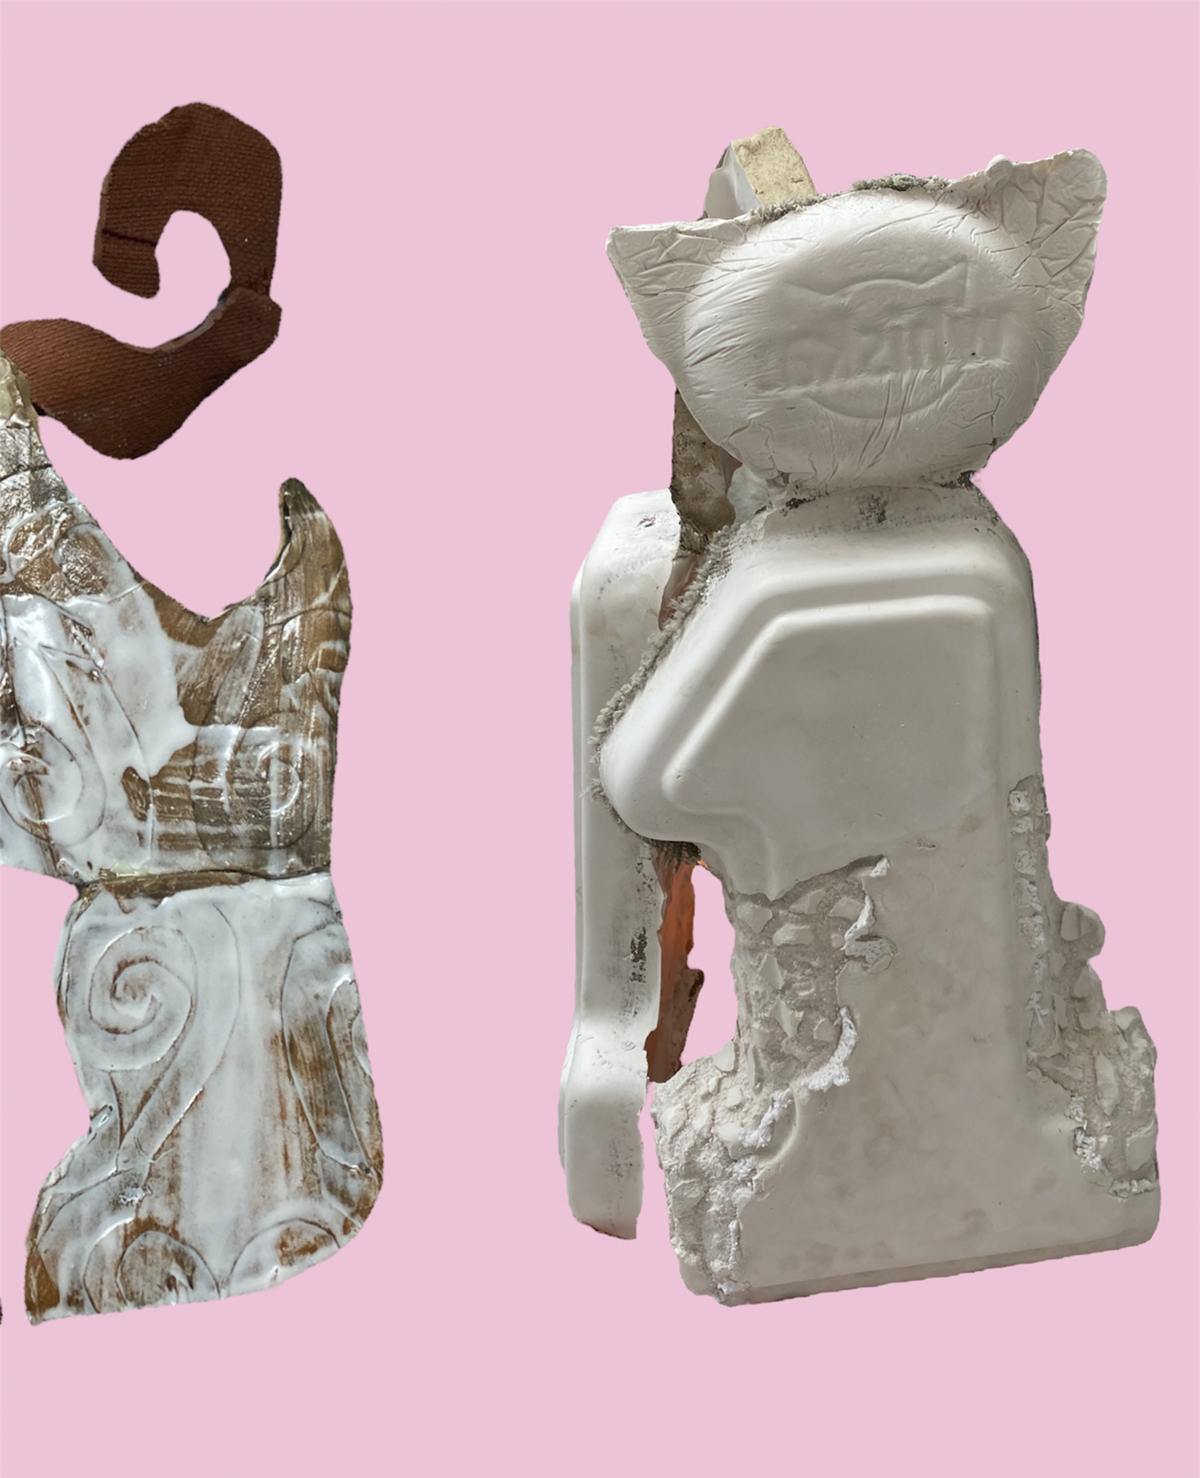 Two pictures of a cat-like sculpture against a pink background.